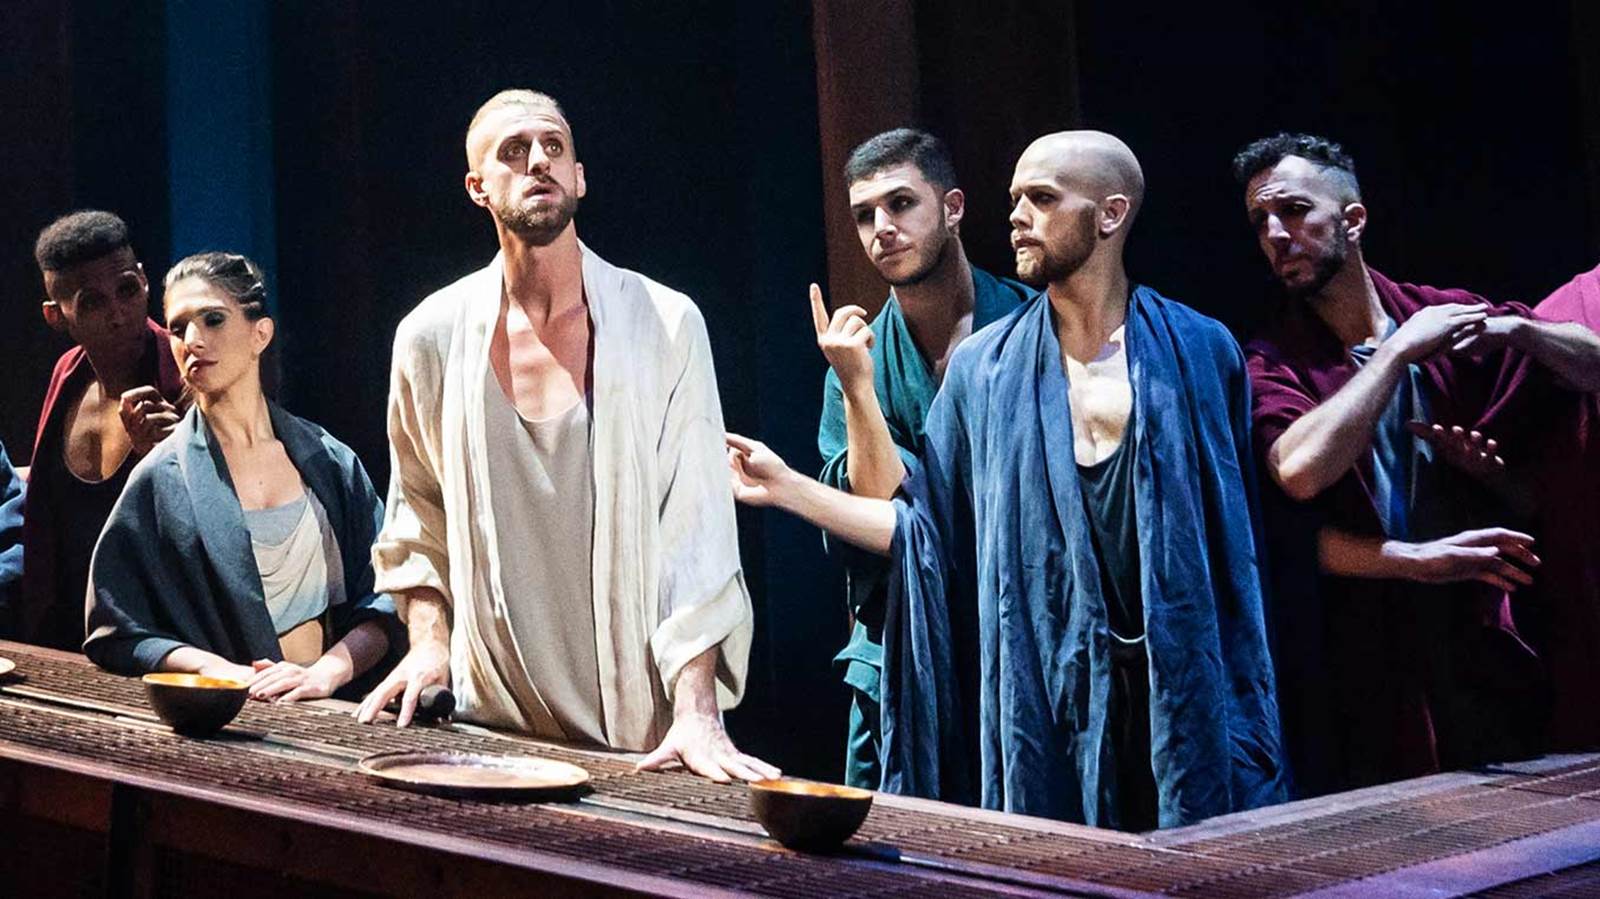 The company of the national tour of Jesus Christ Superstar